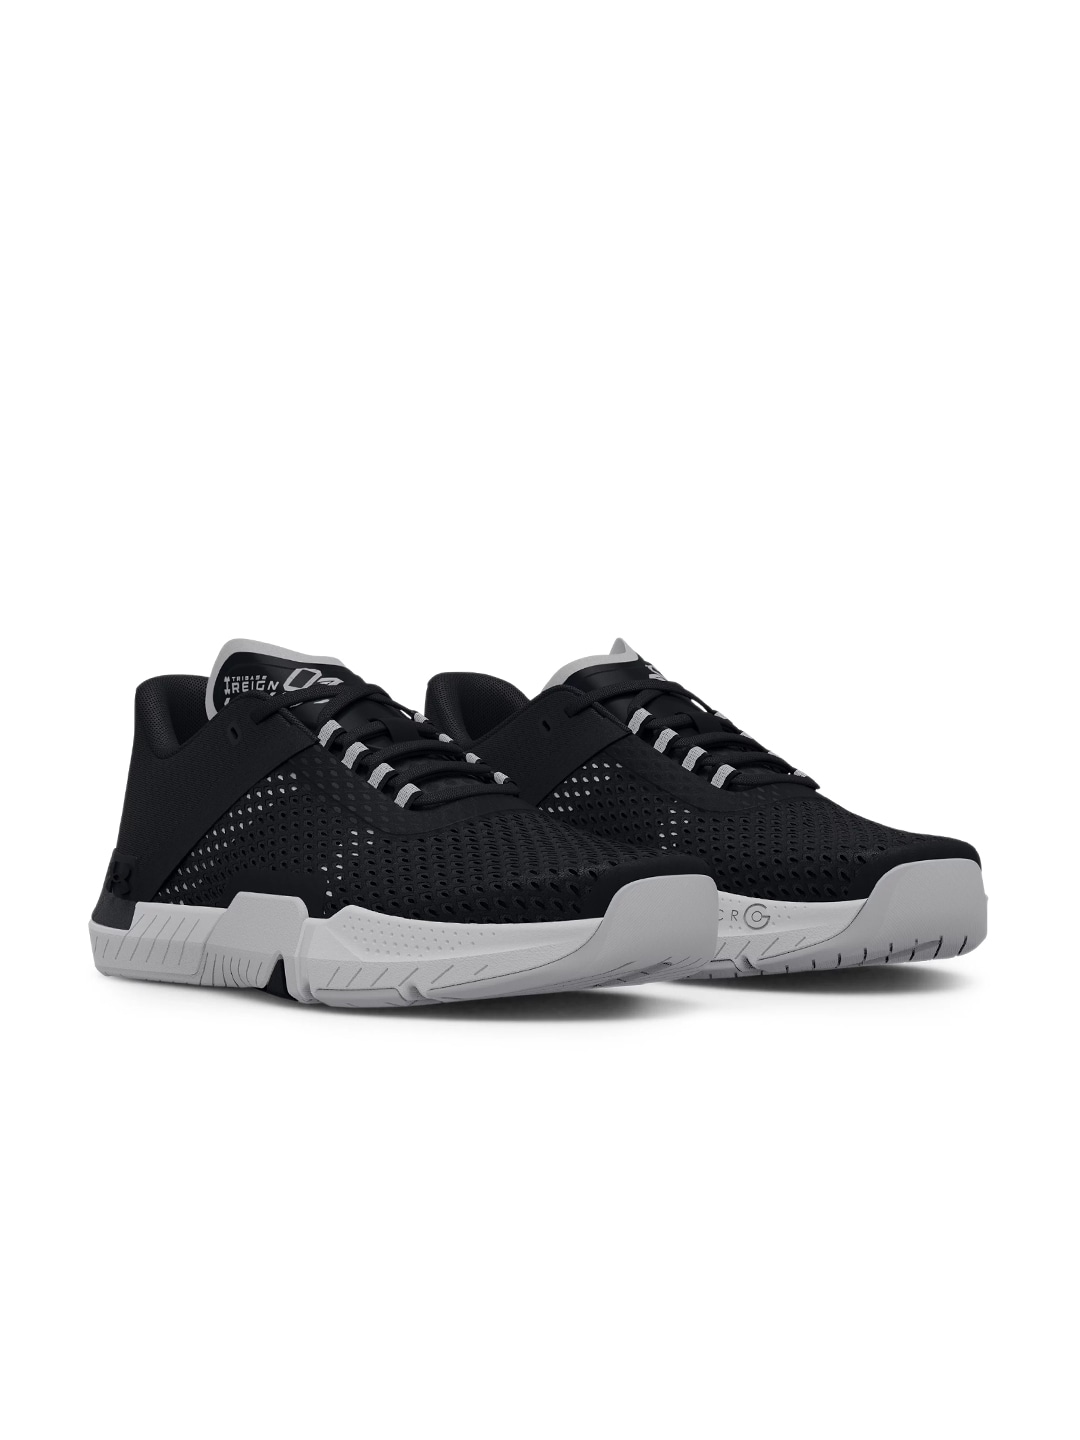 UNDER ARMOUR Women Black & White Woven Mesh Upper TriBase Reign 4 Running Shoes Price in India